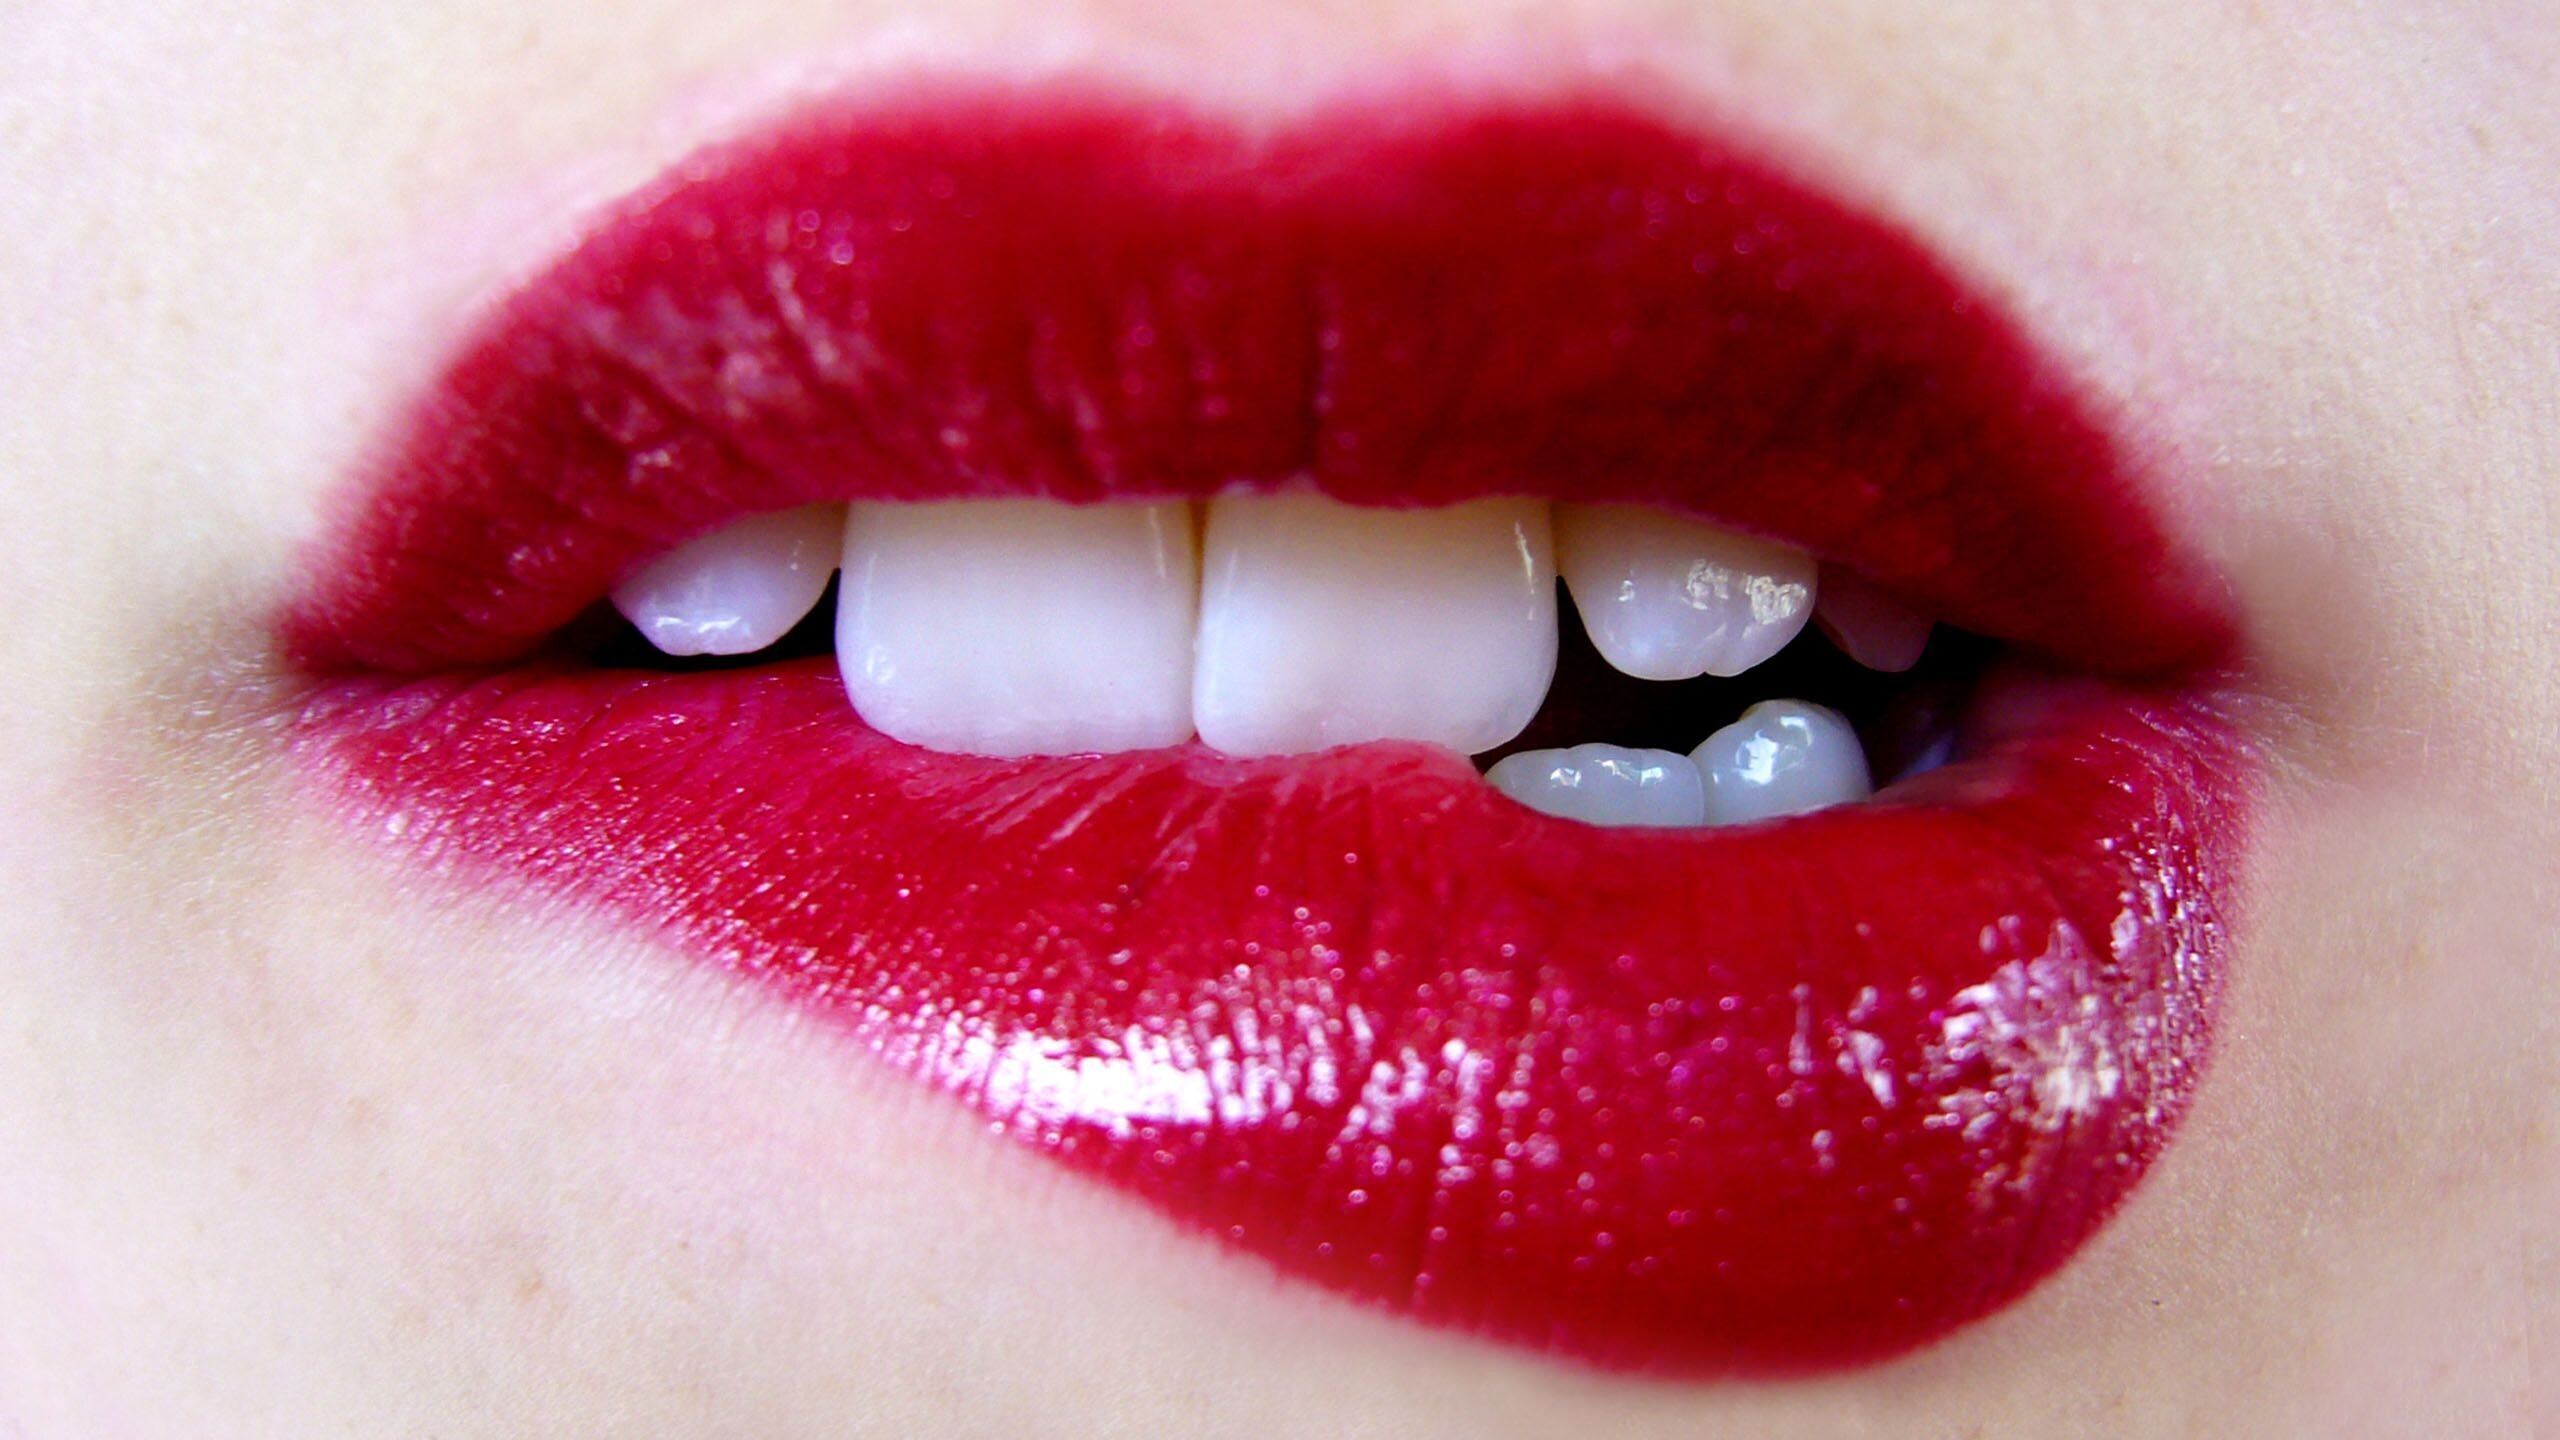 Lipstick: Aesthetic lips colored with red pigmented lip gloss, Teeth whitening. 2560x1440 HD Wallpaper.